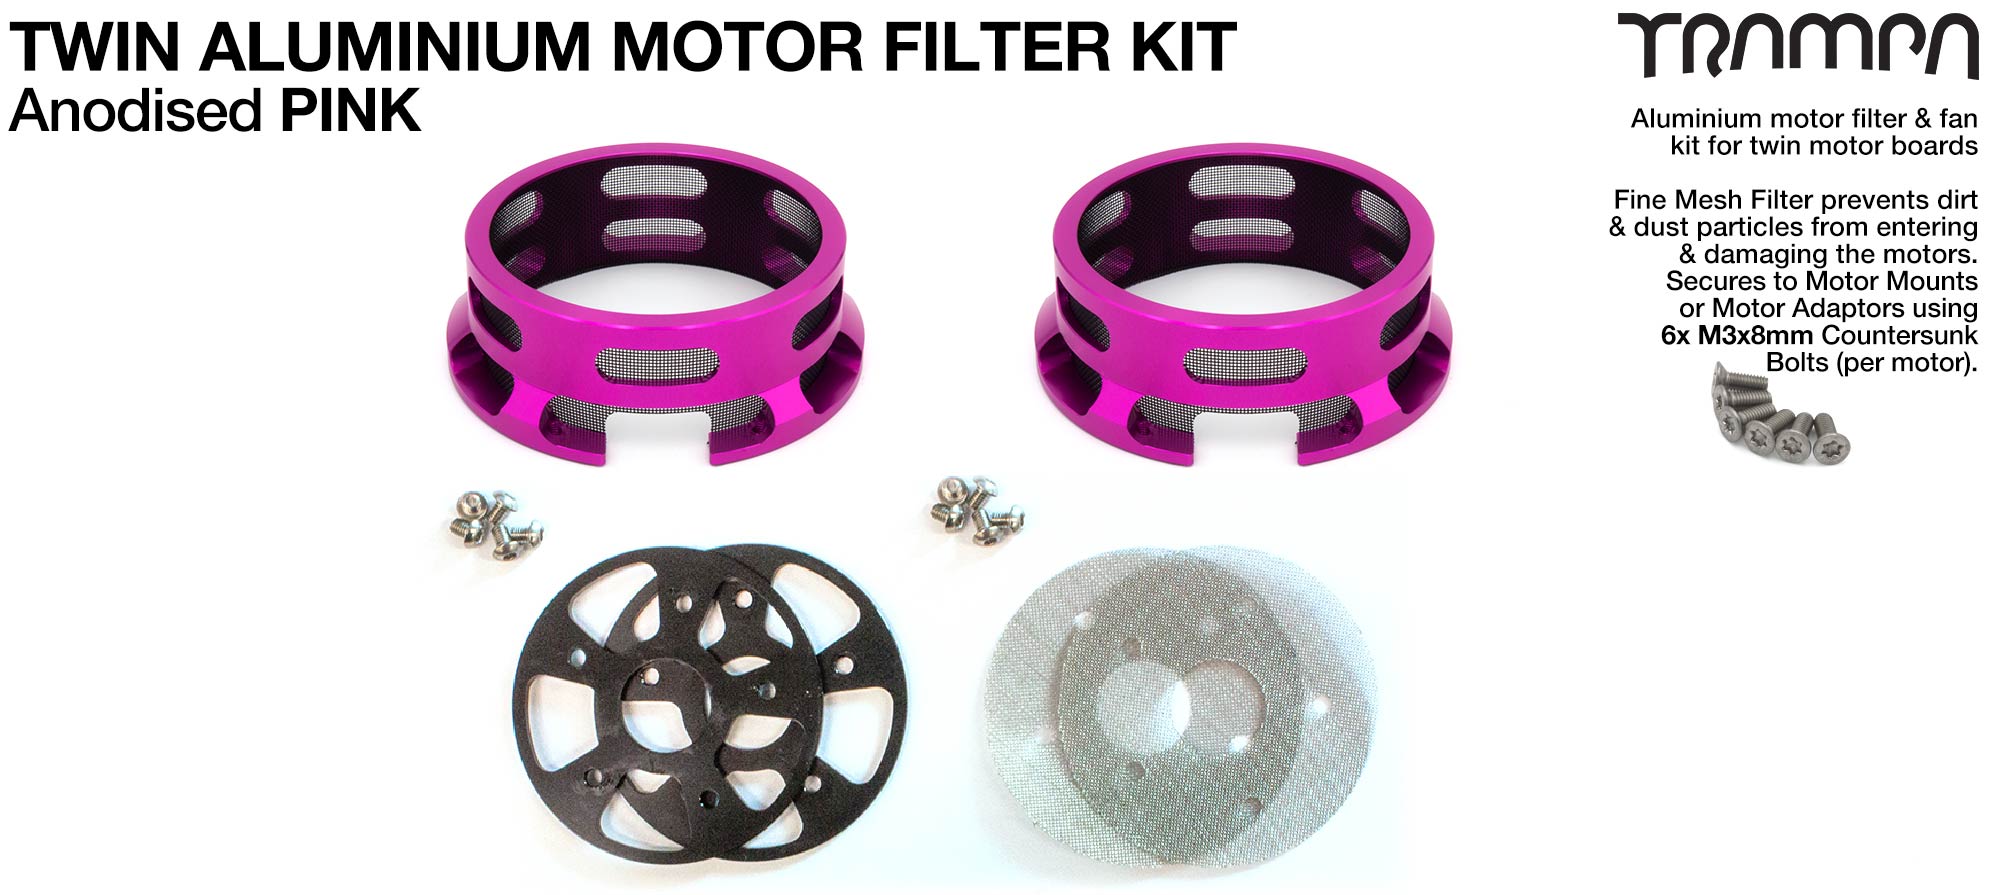 HALF CAGE Motor protection  - PINK anodised with Filters - TWIN